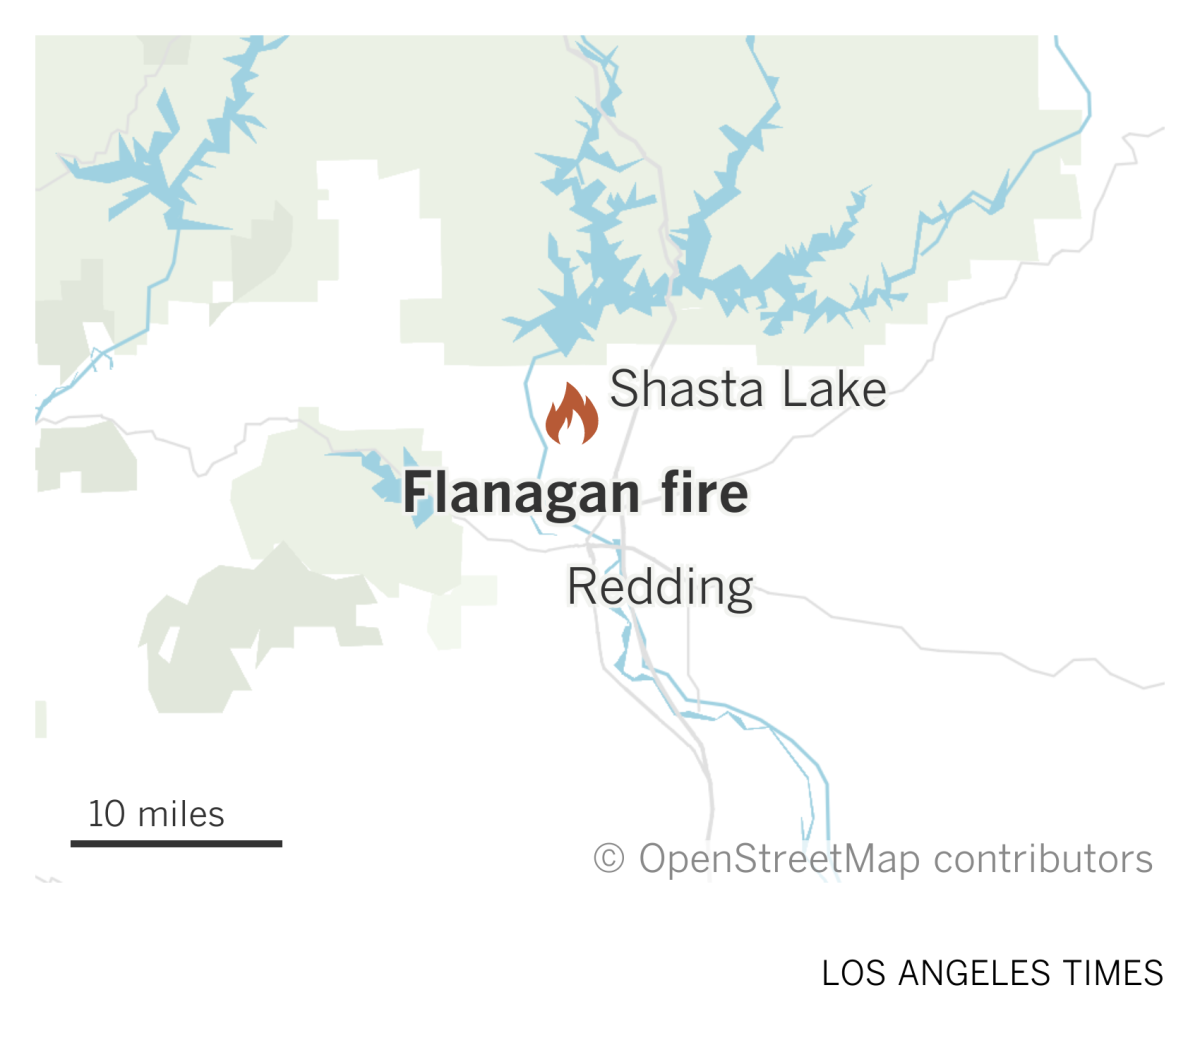 A map shows the location of the Flanagan fire near Shasta Lake and Redding